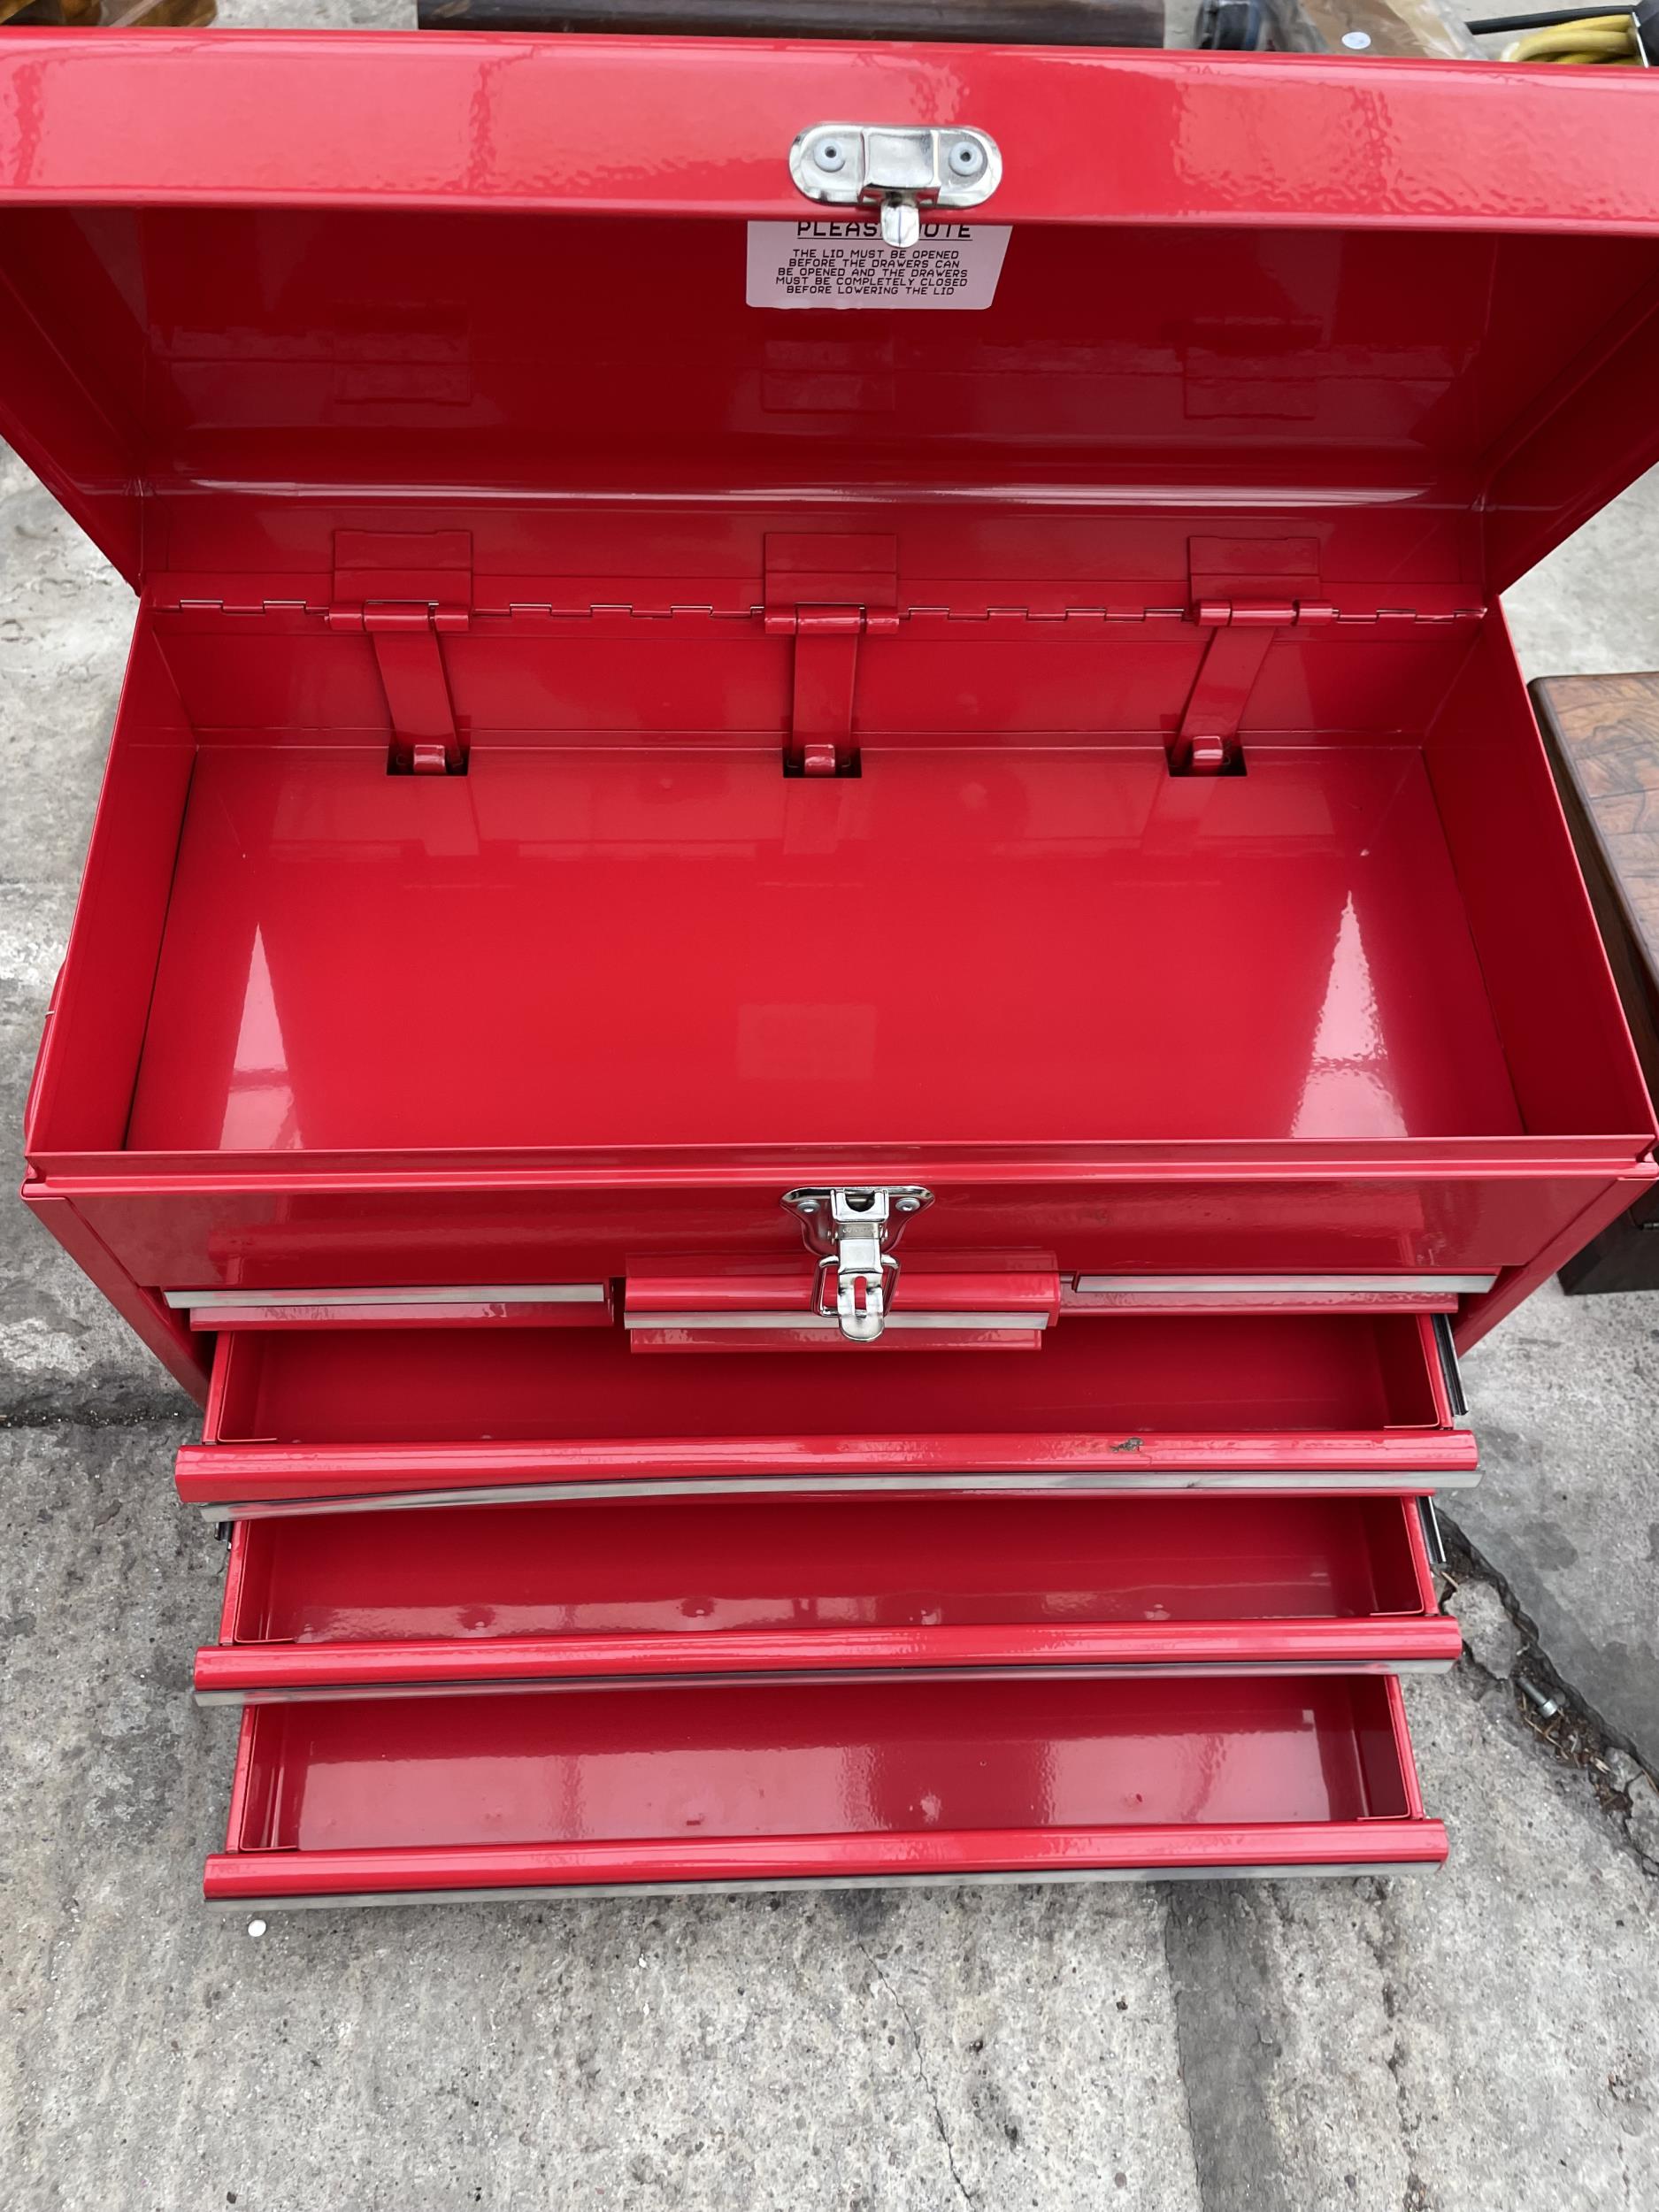 A RED METAL WORKSHOP TOOL BOX WITH SIX DRAWERS AND A TOP STORAGE COMPARTMENT - Image 3 of 4